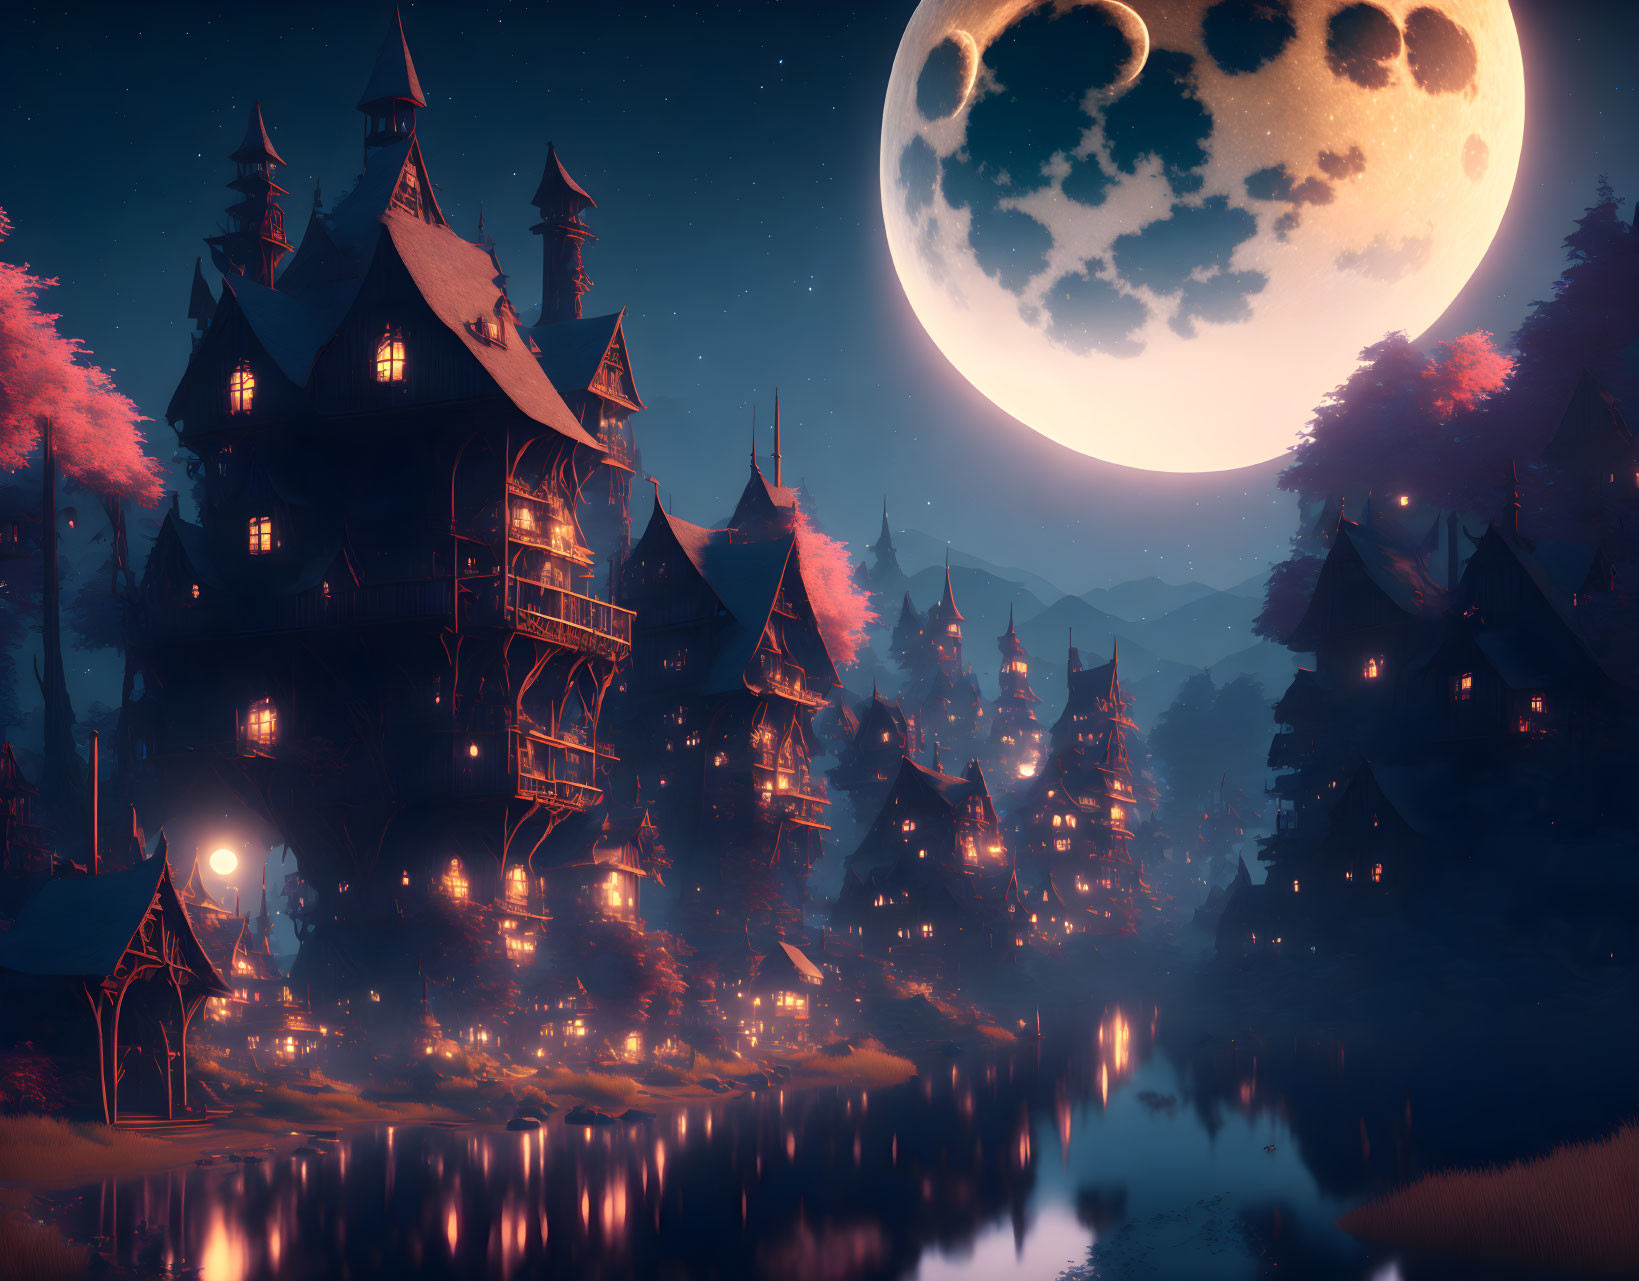 Enchanted village with glowing houses under large moon